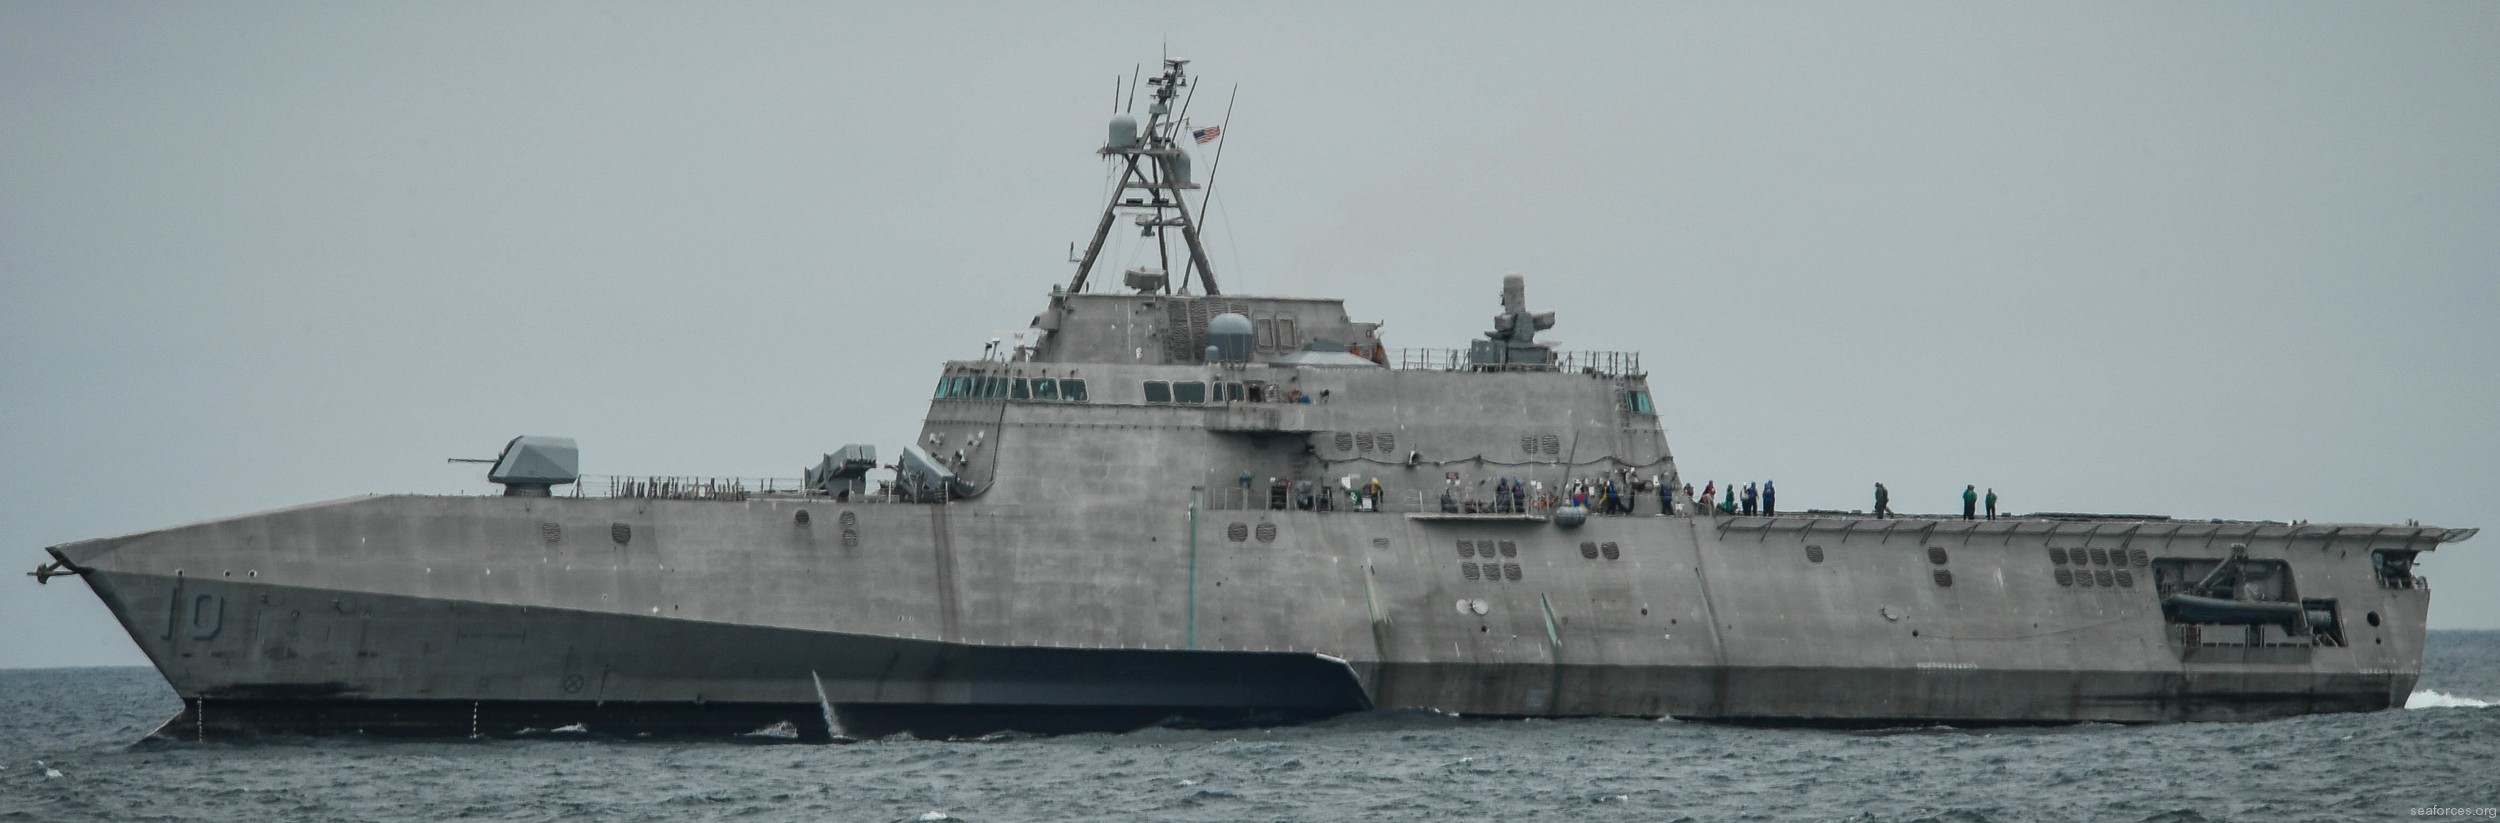 lcs-10 uss gabrielle giffords littoral combat ship independence class us navy 11